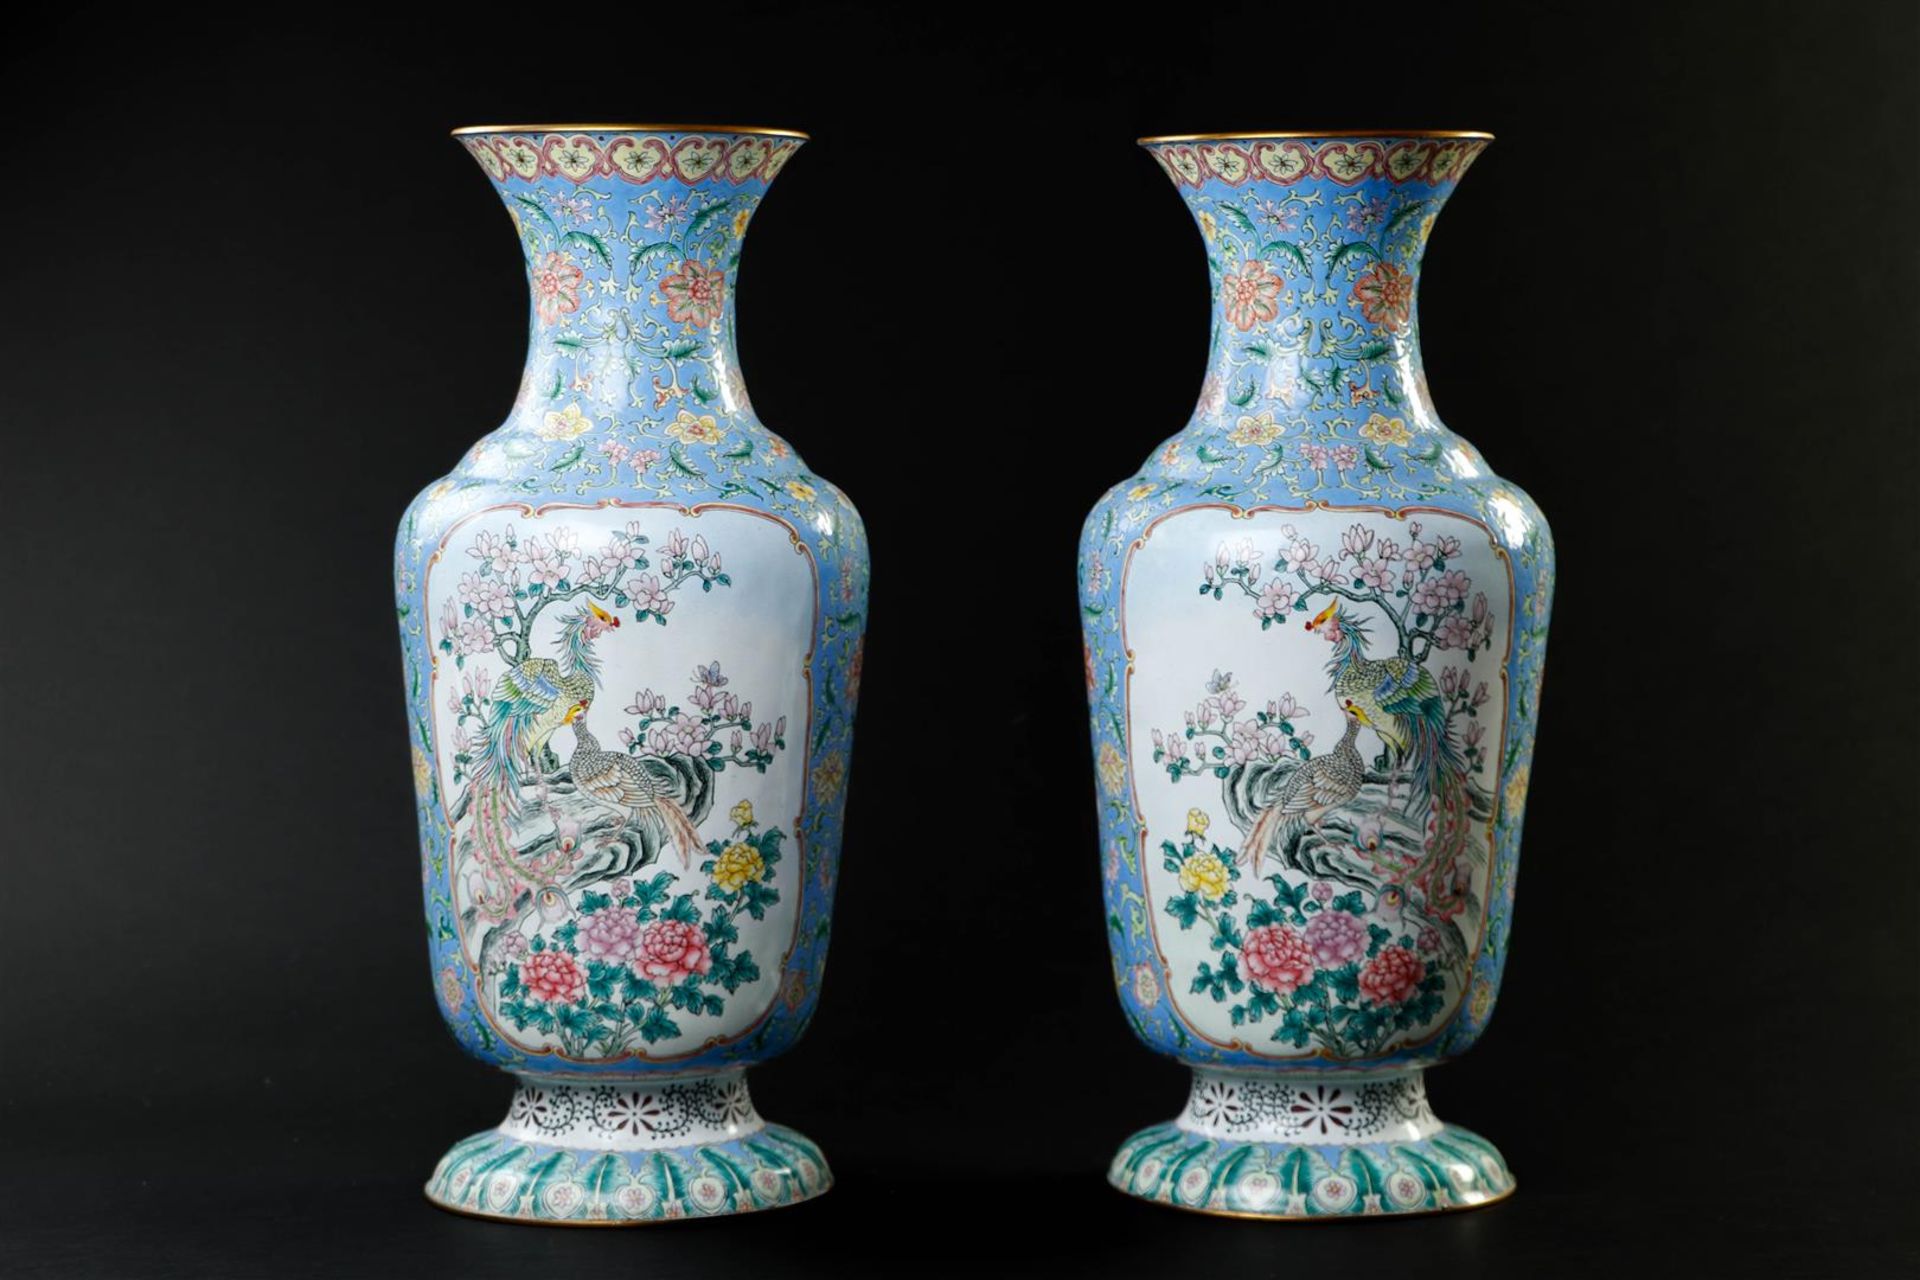 A pair of enamel famille rose vases depicting peacocks. China, 20th century.
H. 44 cm.